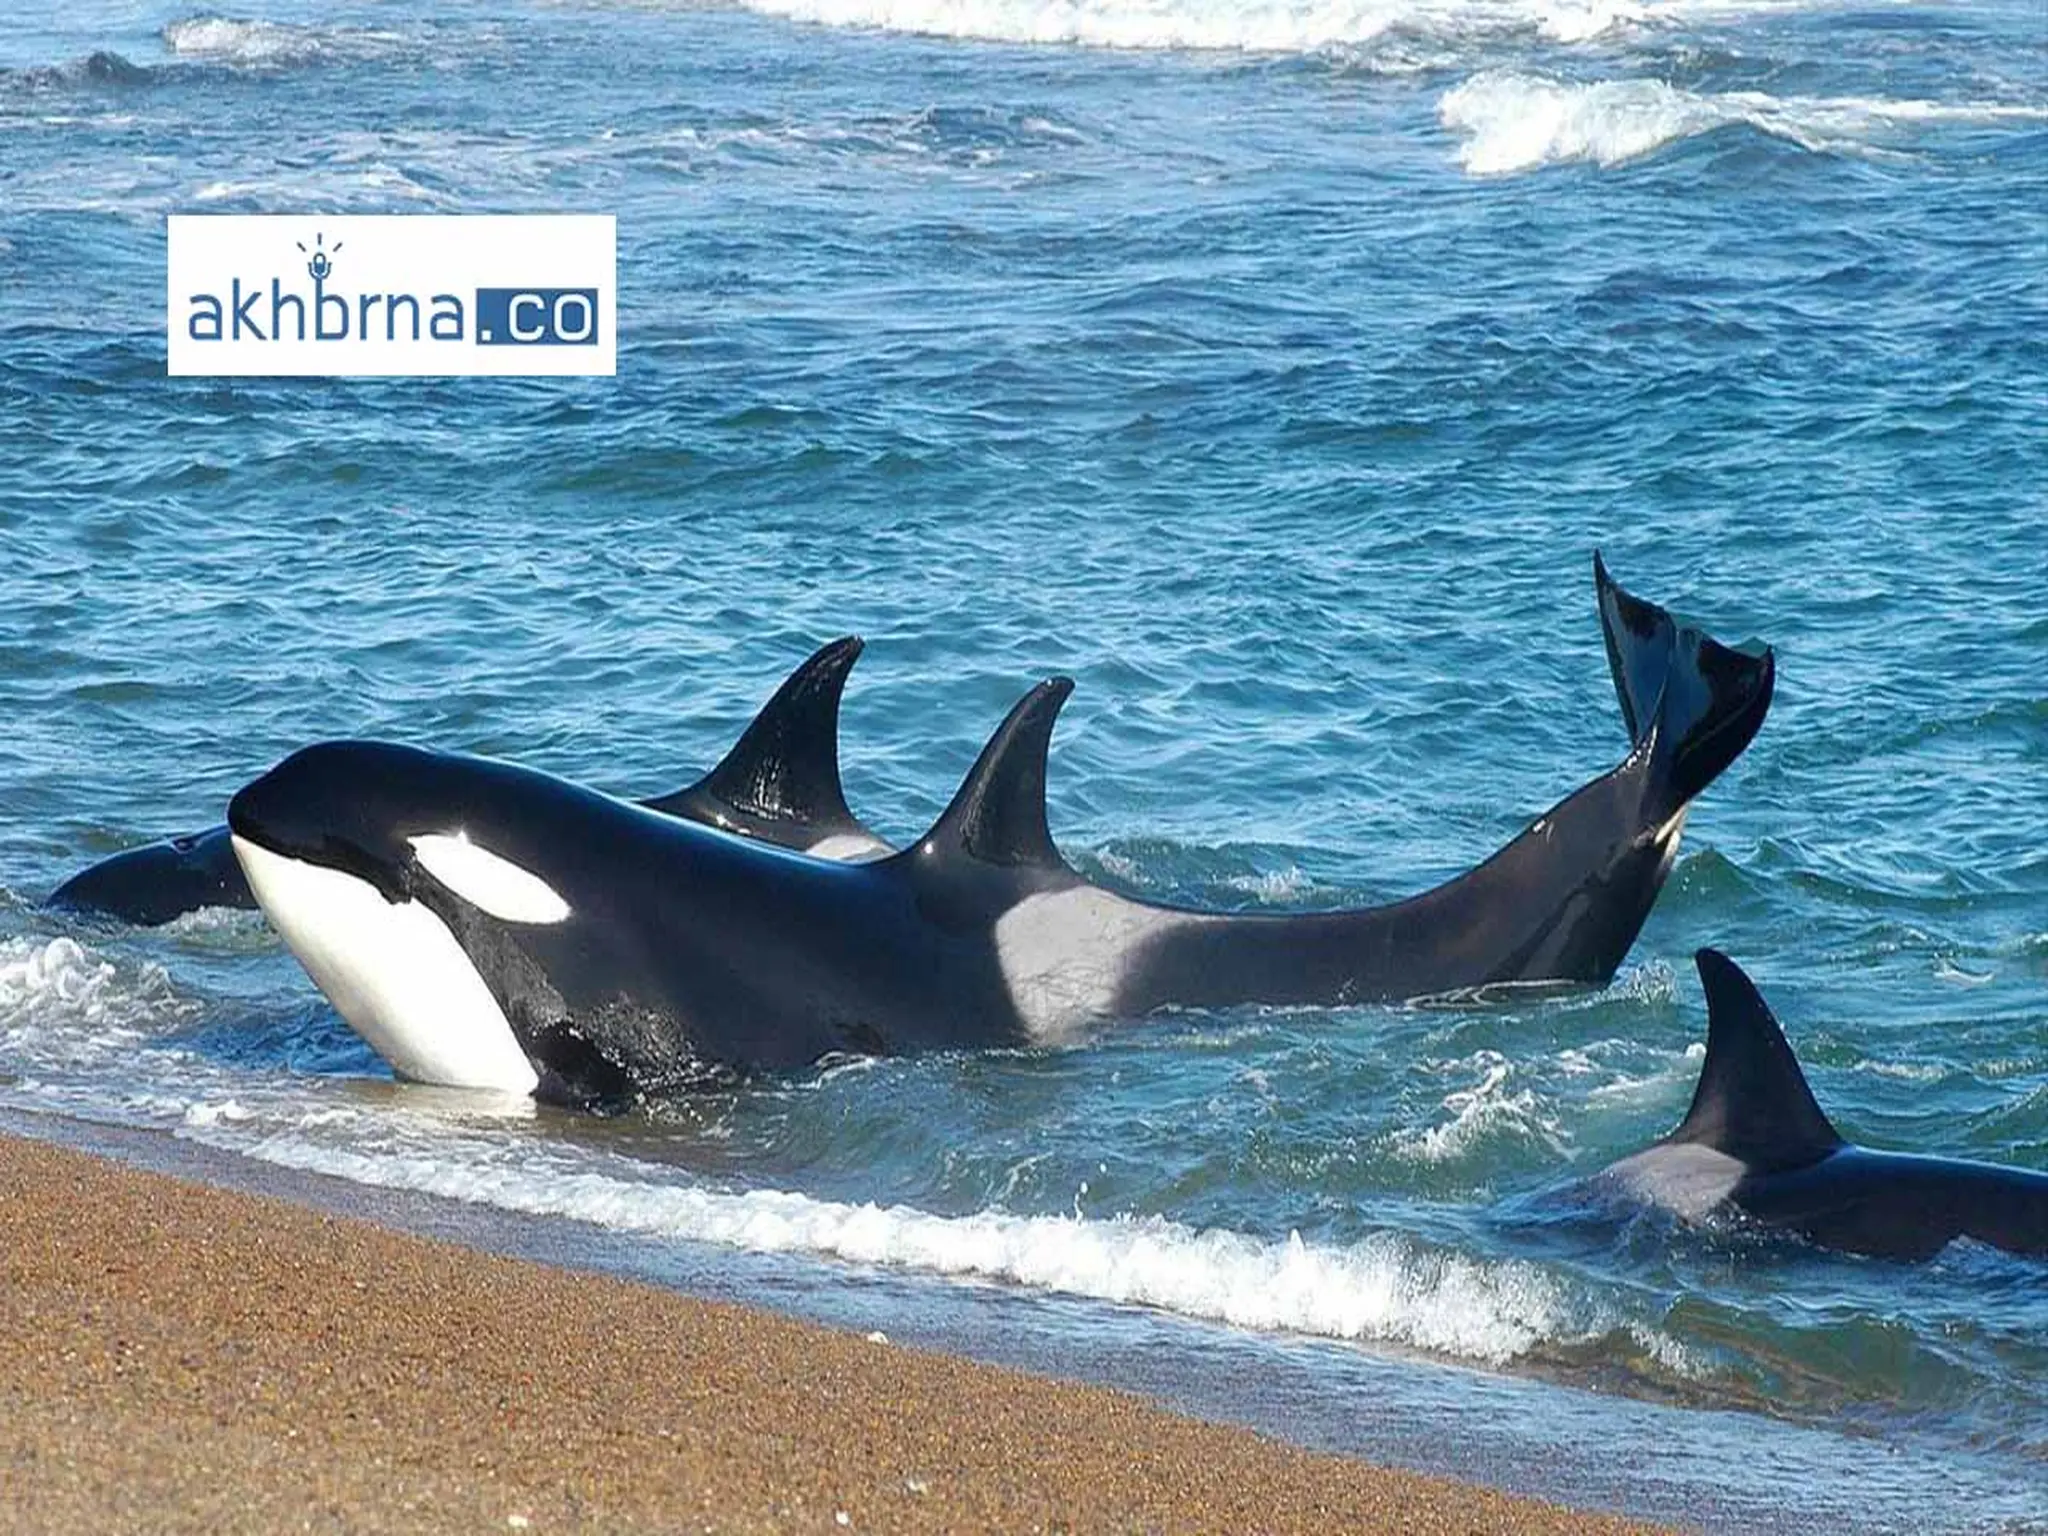 warns against swimming off the coast of Abu Dhabi Because of the deadly orca whales